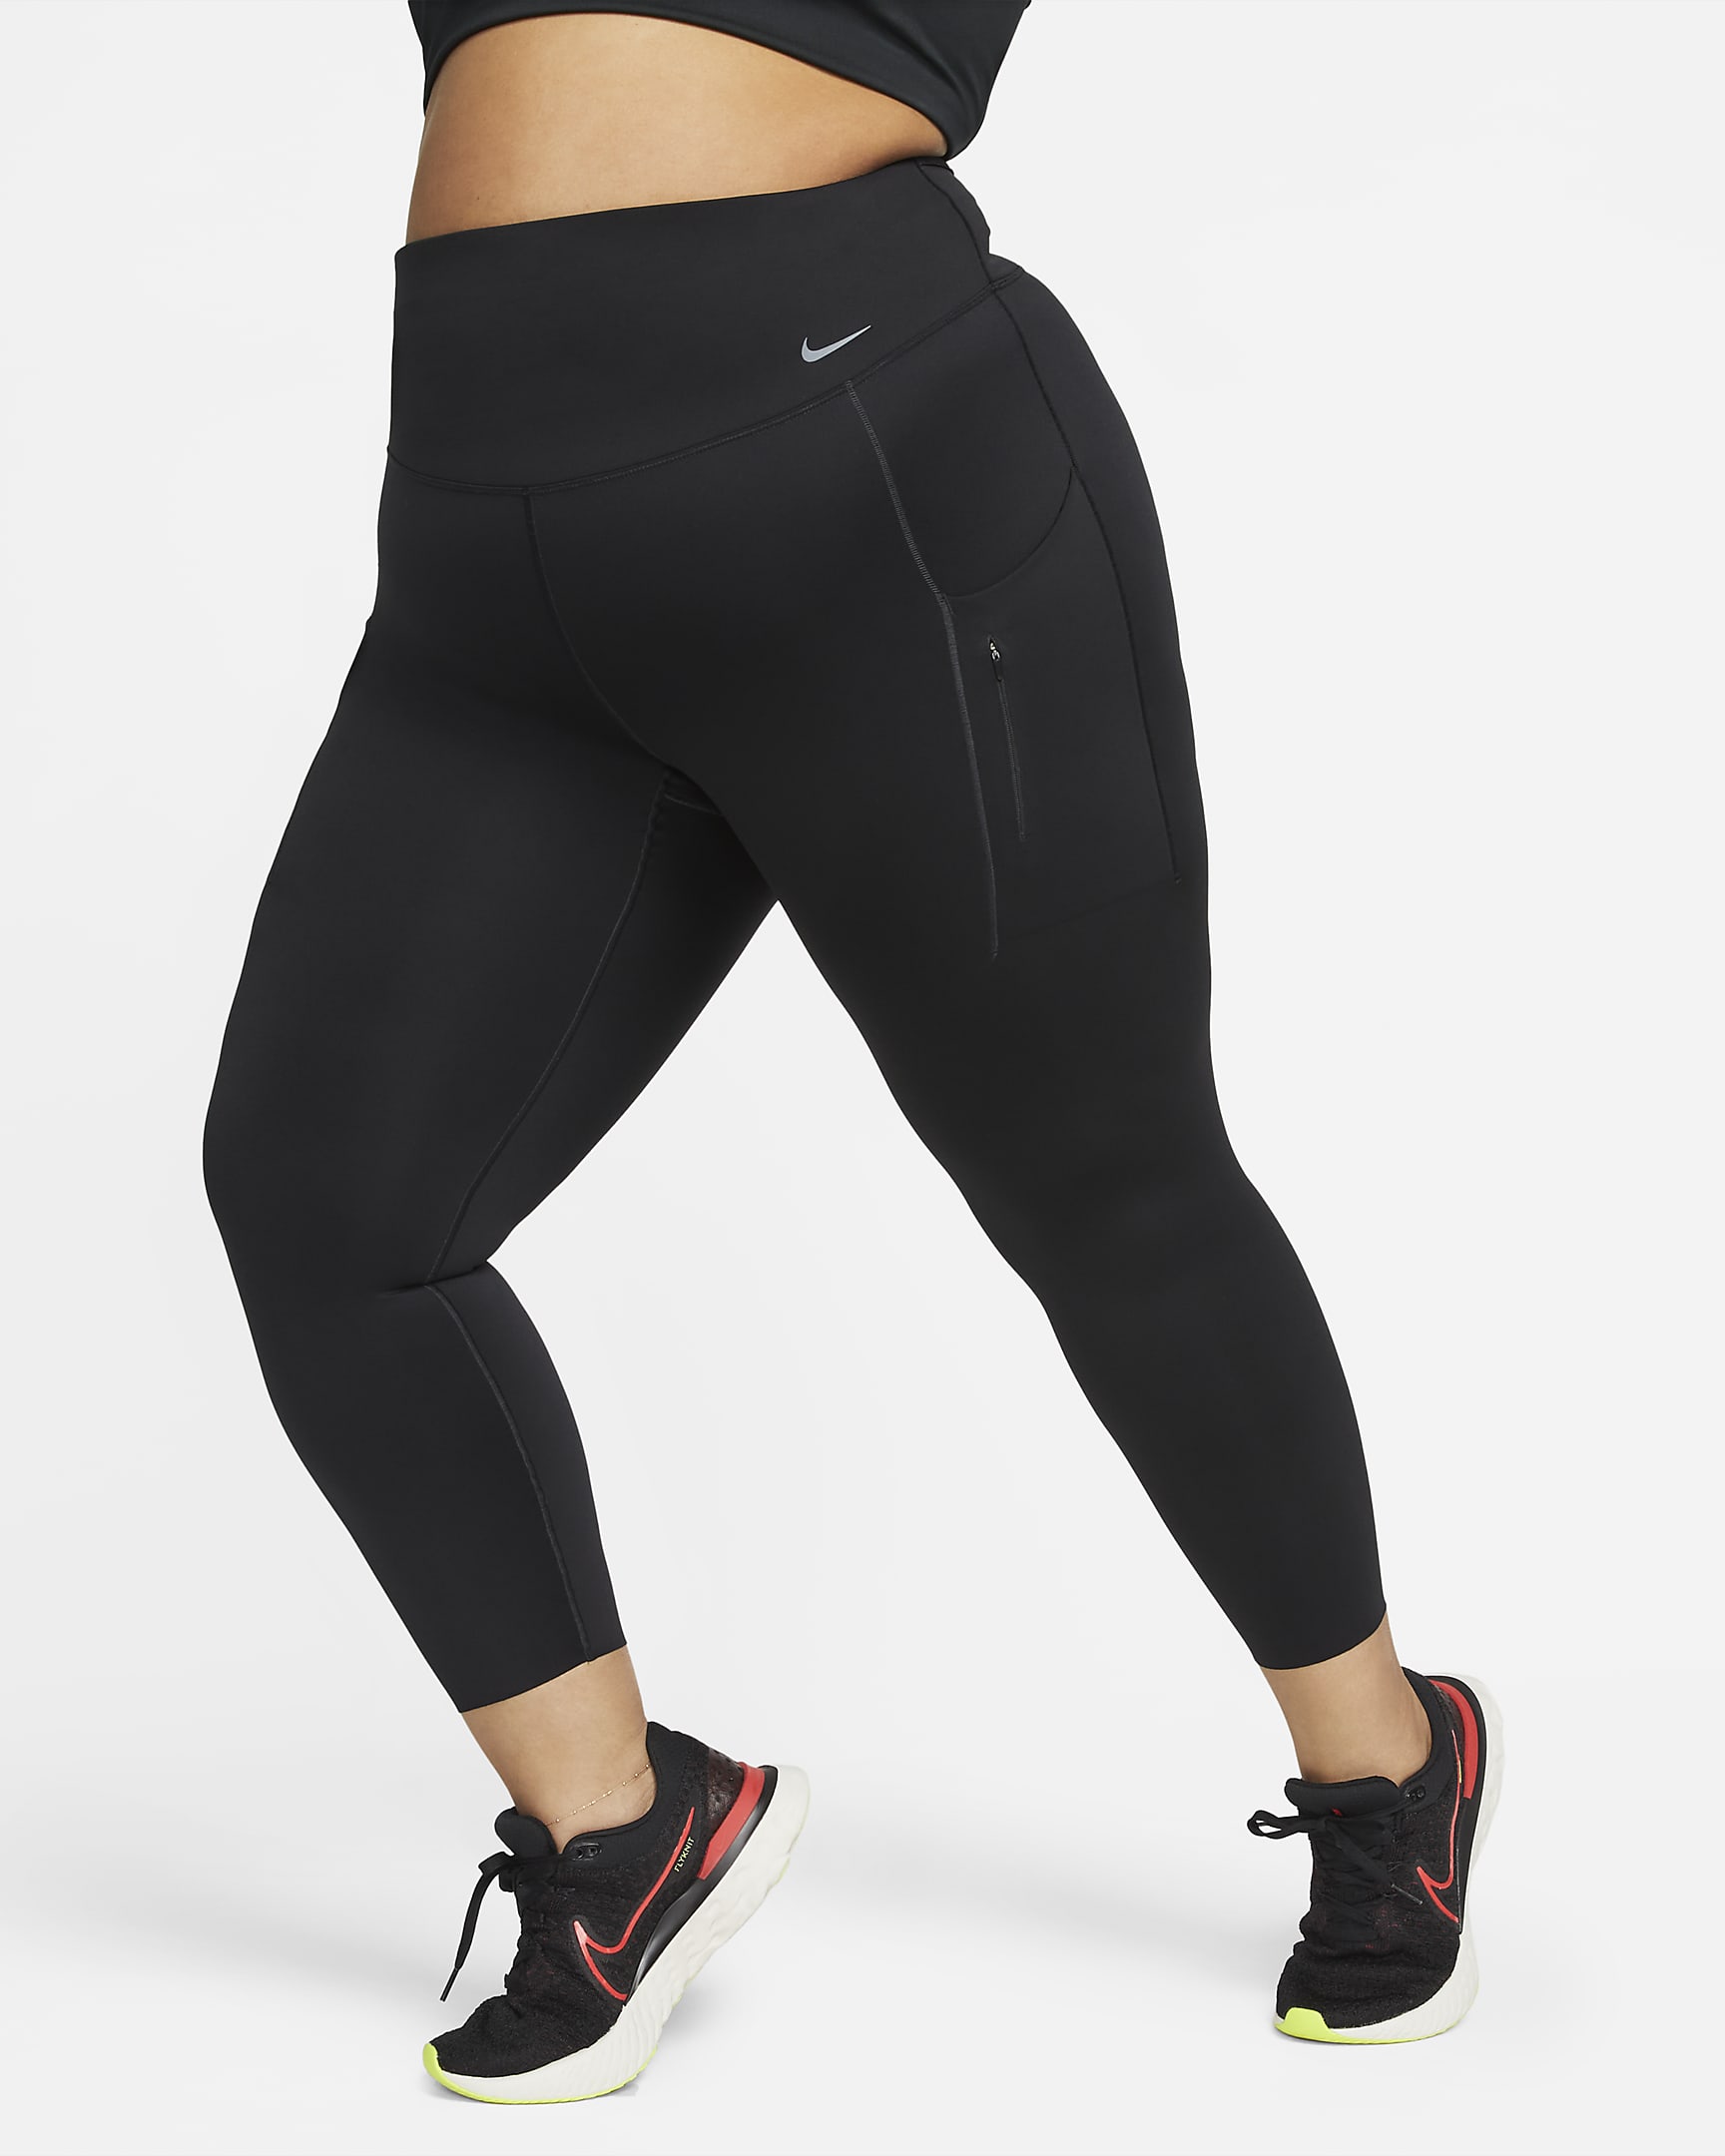 Nike Go Women's Firm-Support High-Waisted 7/8 Leggings with Pockets (Plus Size) - Black/Black